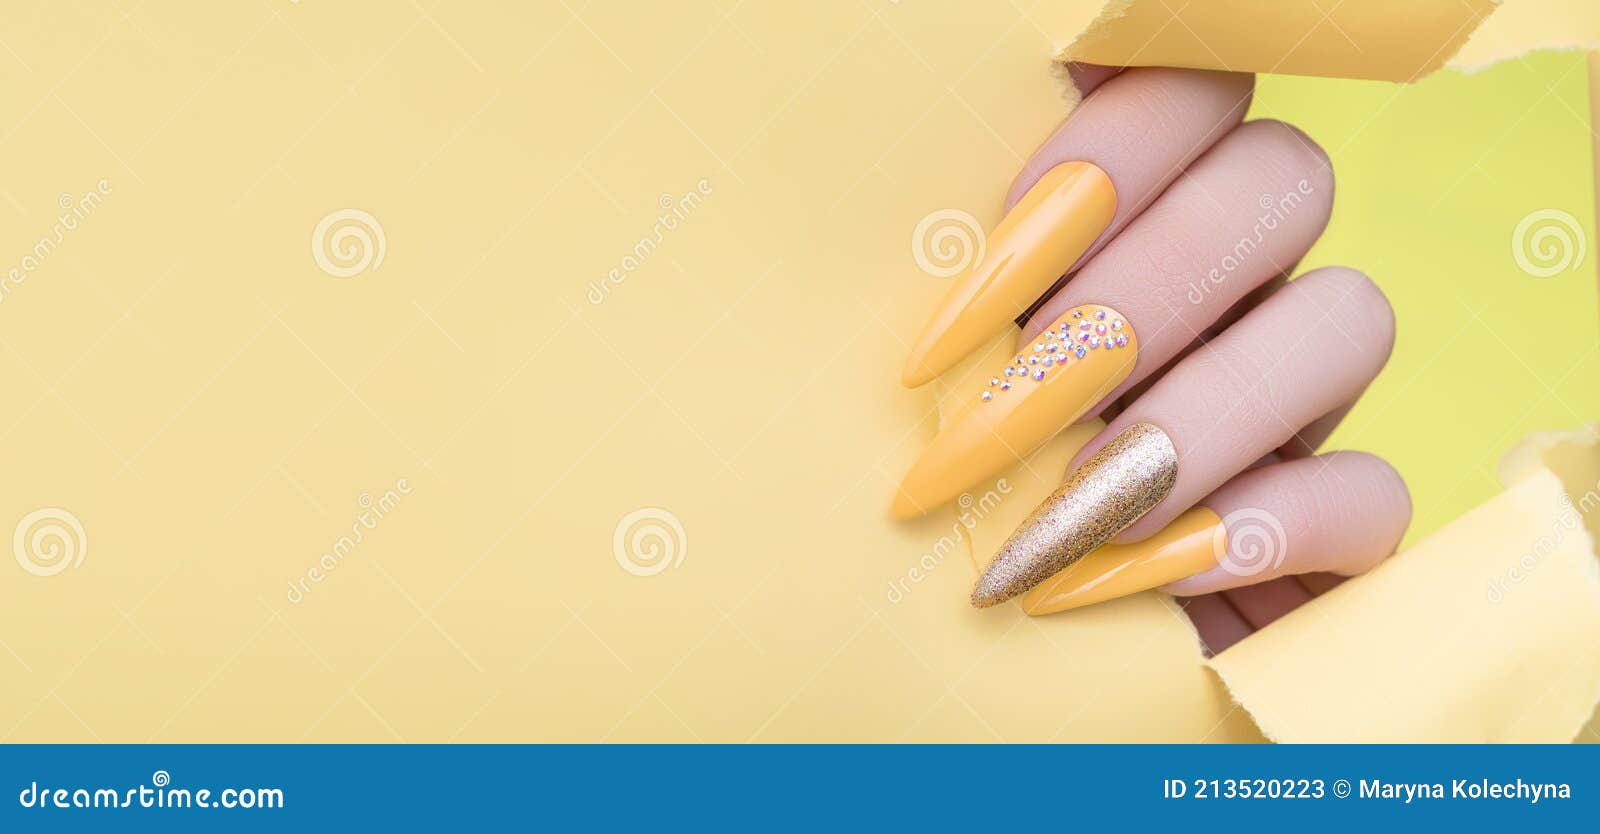 2. Neon Yellow and Black Prom Nail Design - wide 1